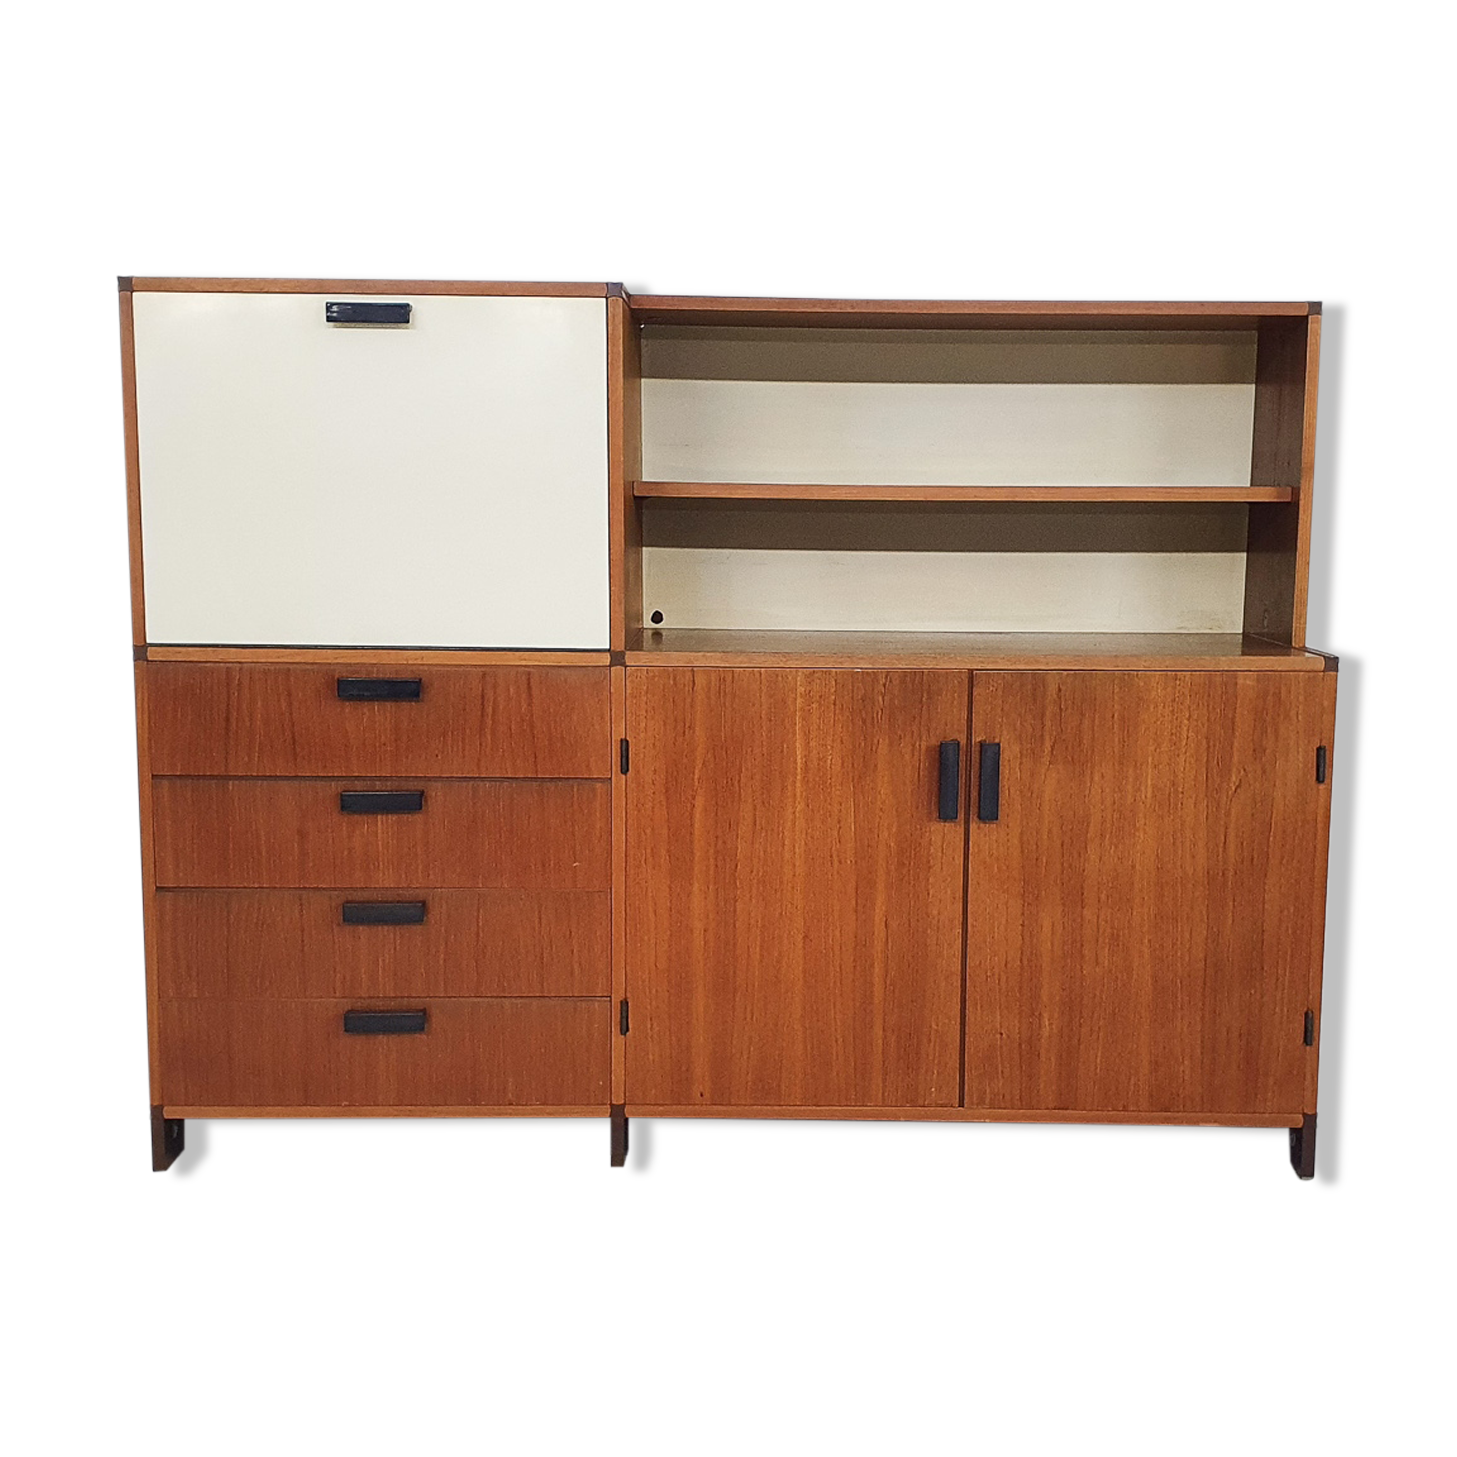 Buffet « Made to measure » Cees Braakman pour Pastoe, Pays-Bas années 1950